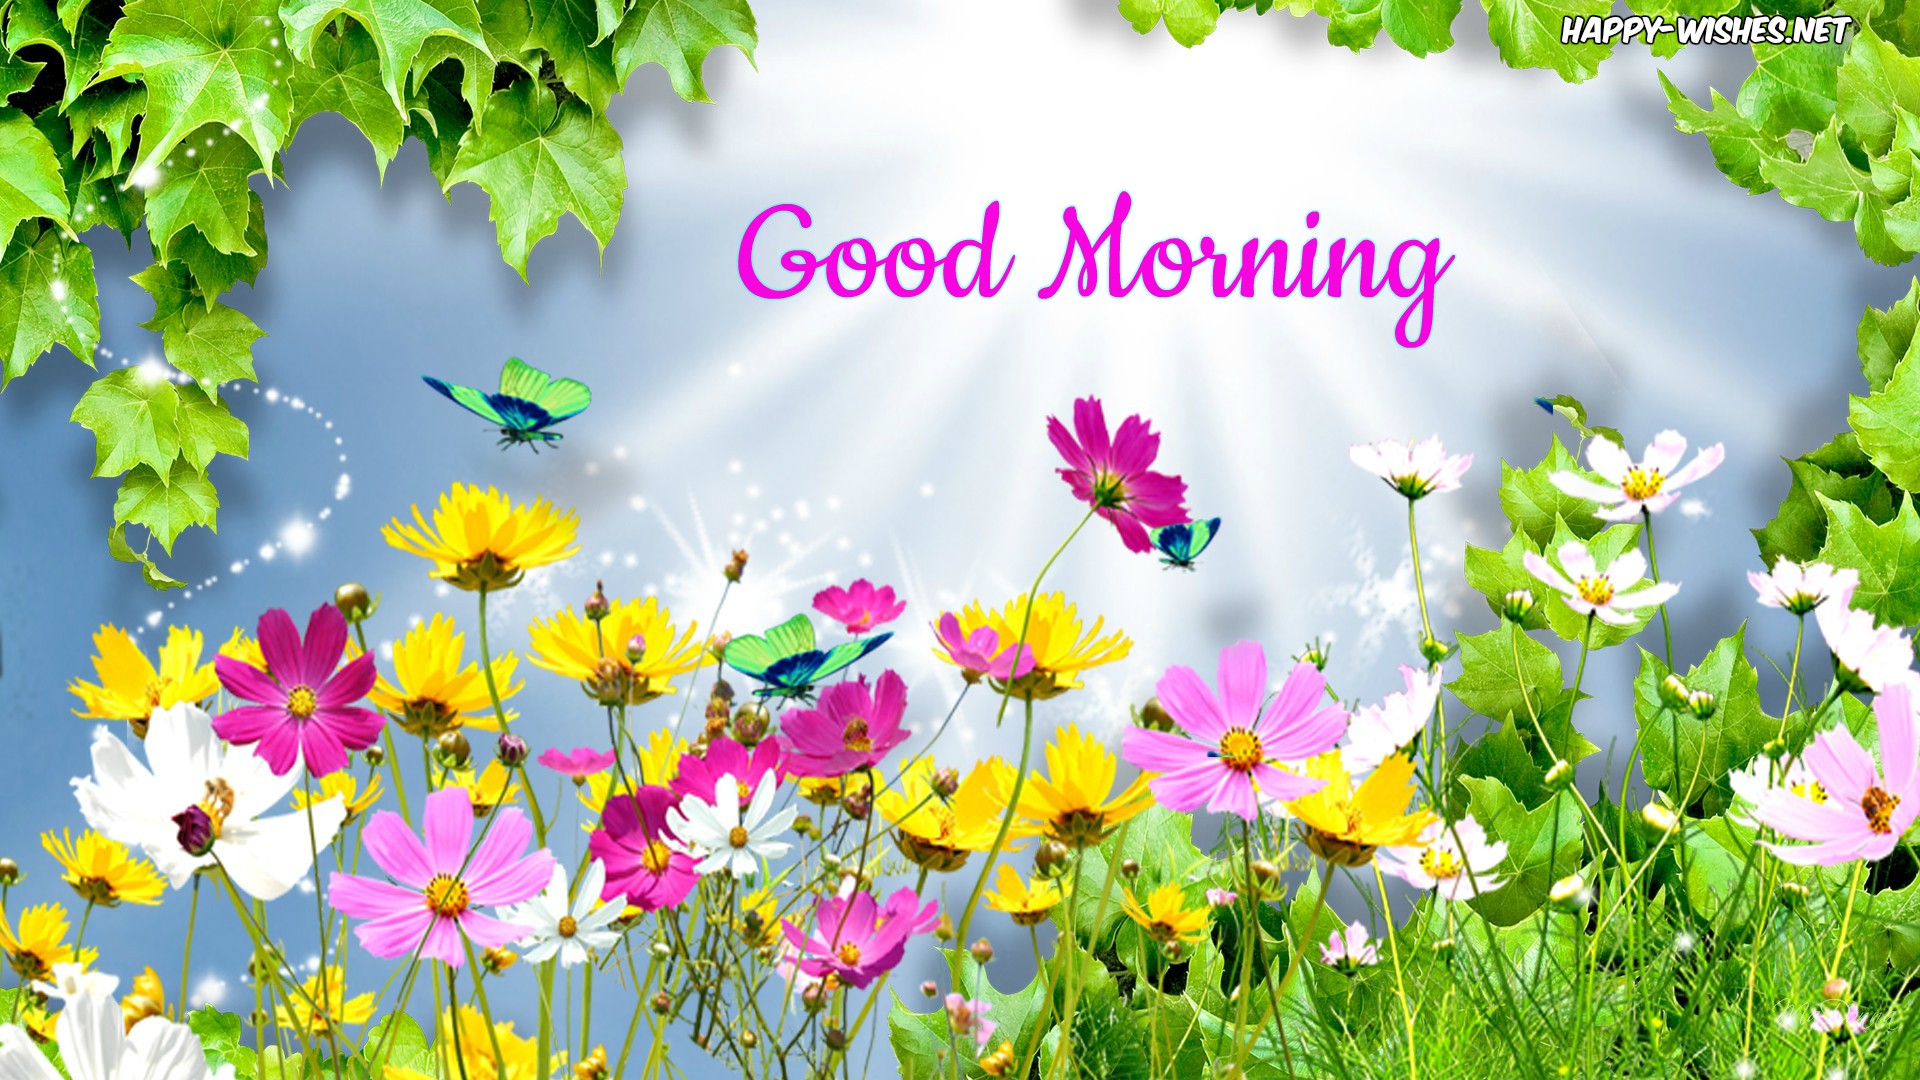 Best animated good morning wishes